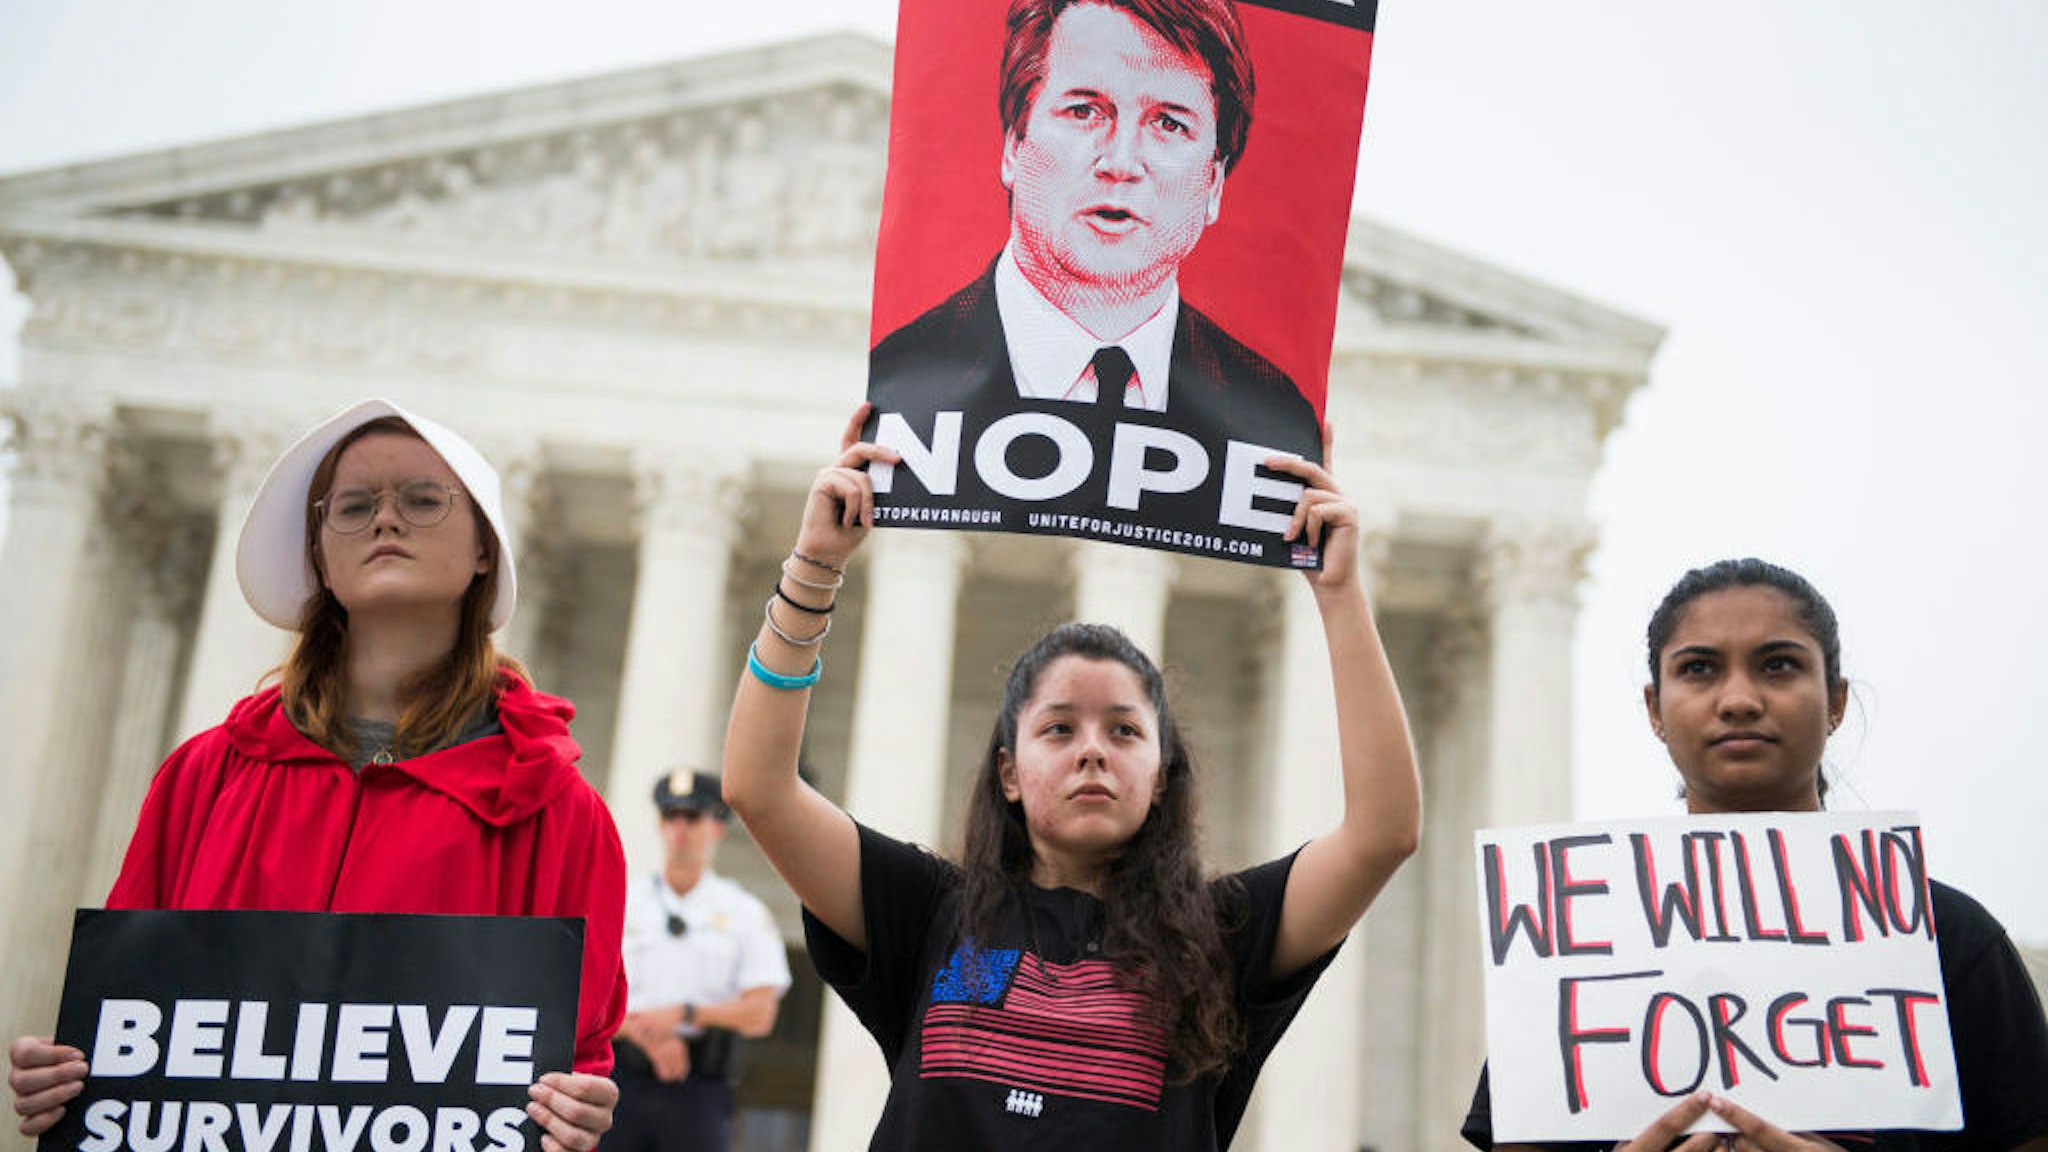 Protesters demonstrate in front of the Supreme Court to oppose the new associate justice Brett Kavanaugh on his first day of hearing arguments on October 4, 2018. (Photo By Tom Williams/CQ Roll Call)